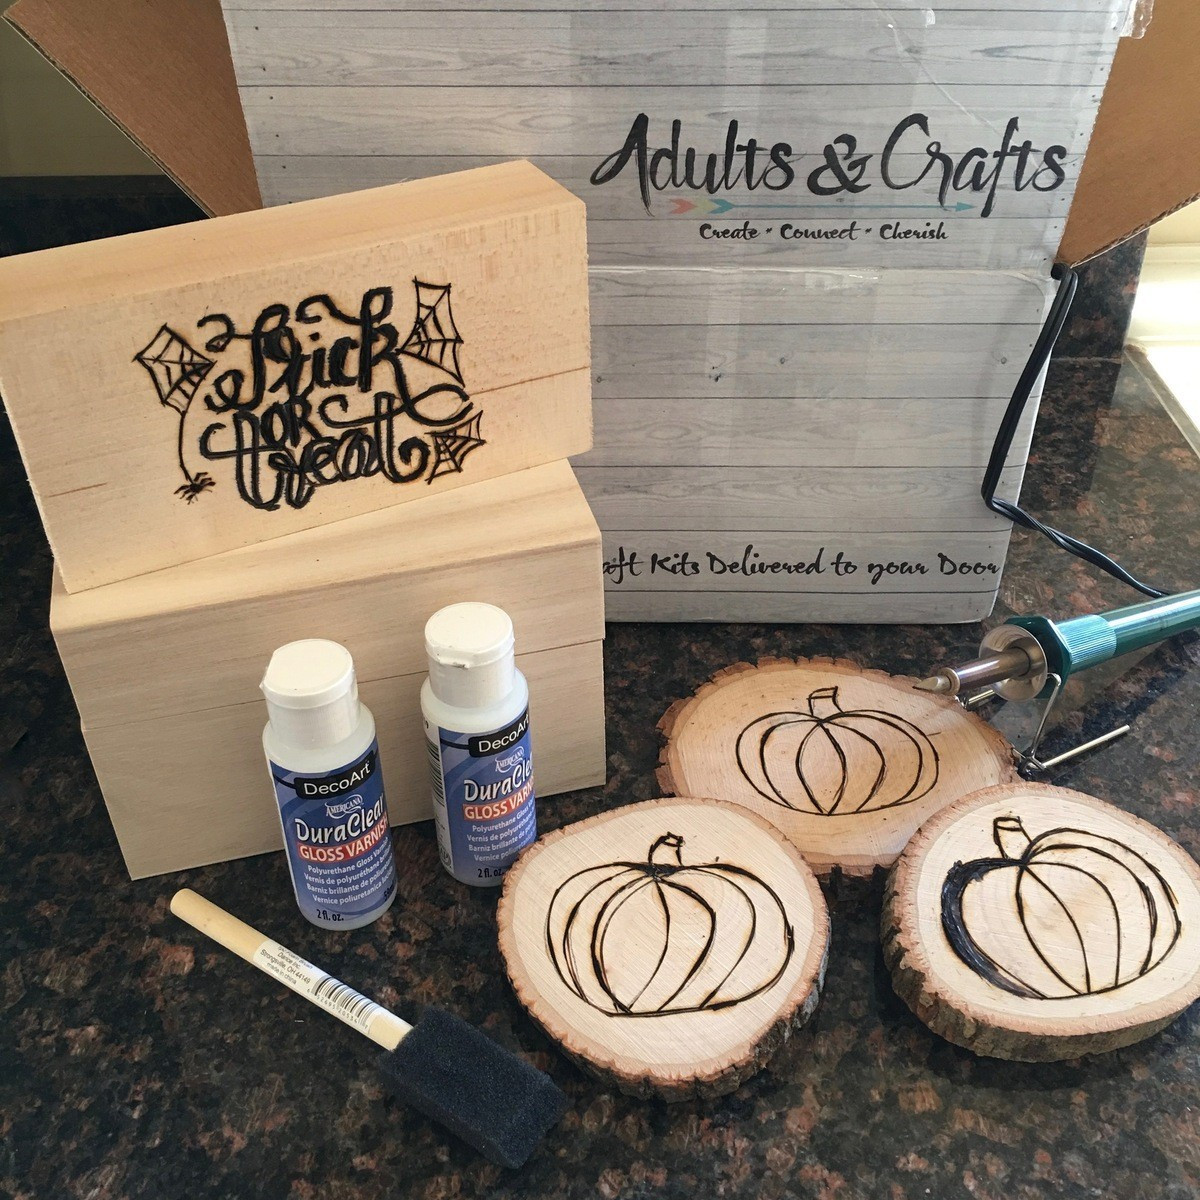 September Crafts For Adults
 Adults & Crafts Review Wood Burning 3 Pack Kit